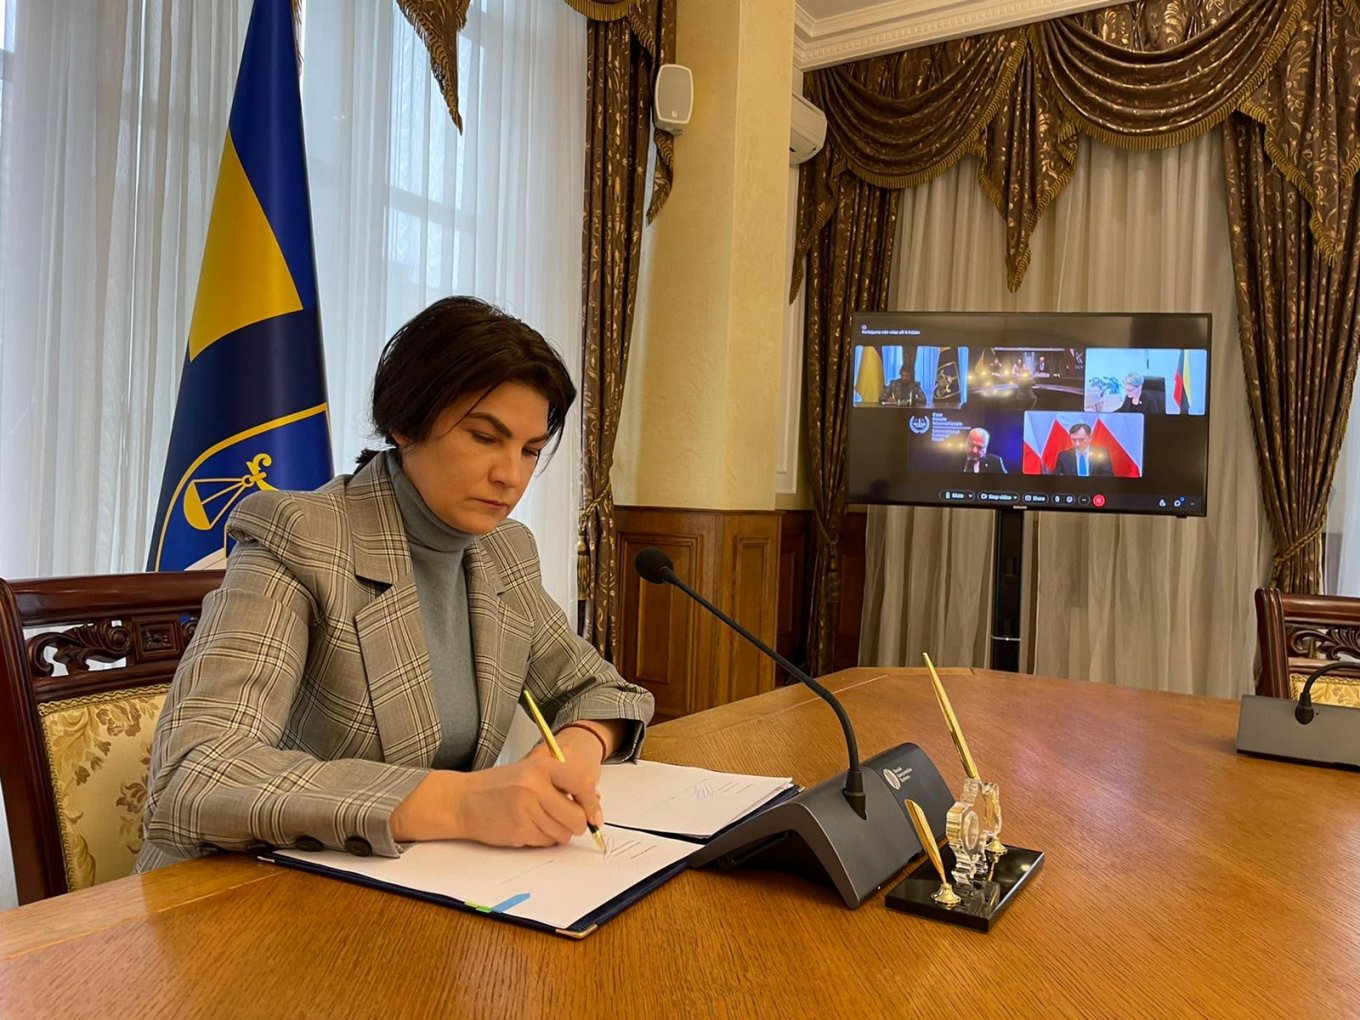 Defense Express / Prosecutor General of Ukraine Iryna Venediktova during the joint online meeting with the members of the Joint Investigation Team / ICC Office of the Prosecutor Will Investigate Russian War Crimes in Ukraine